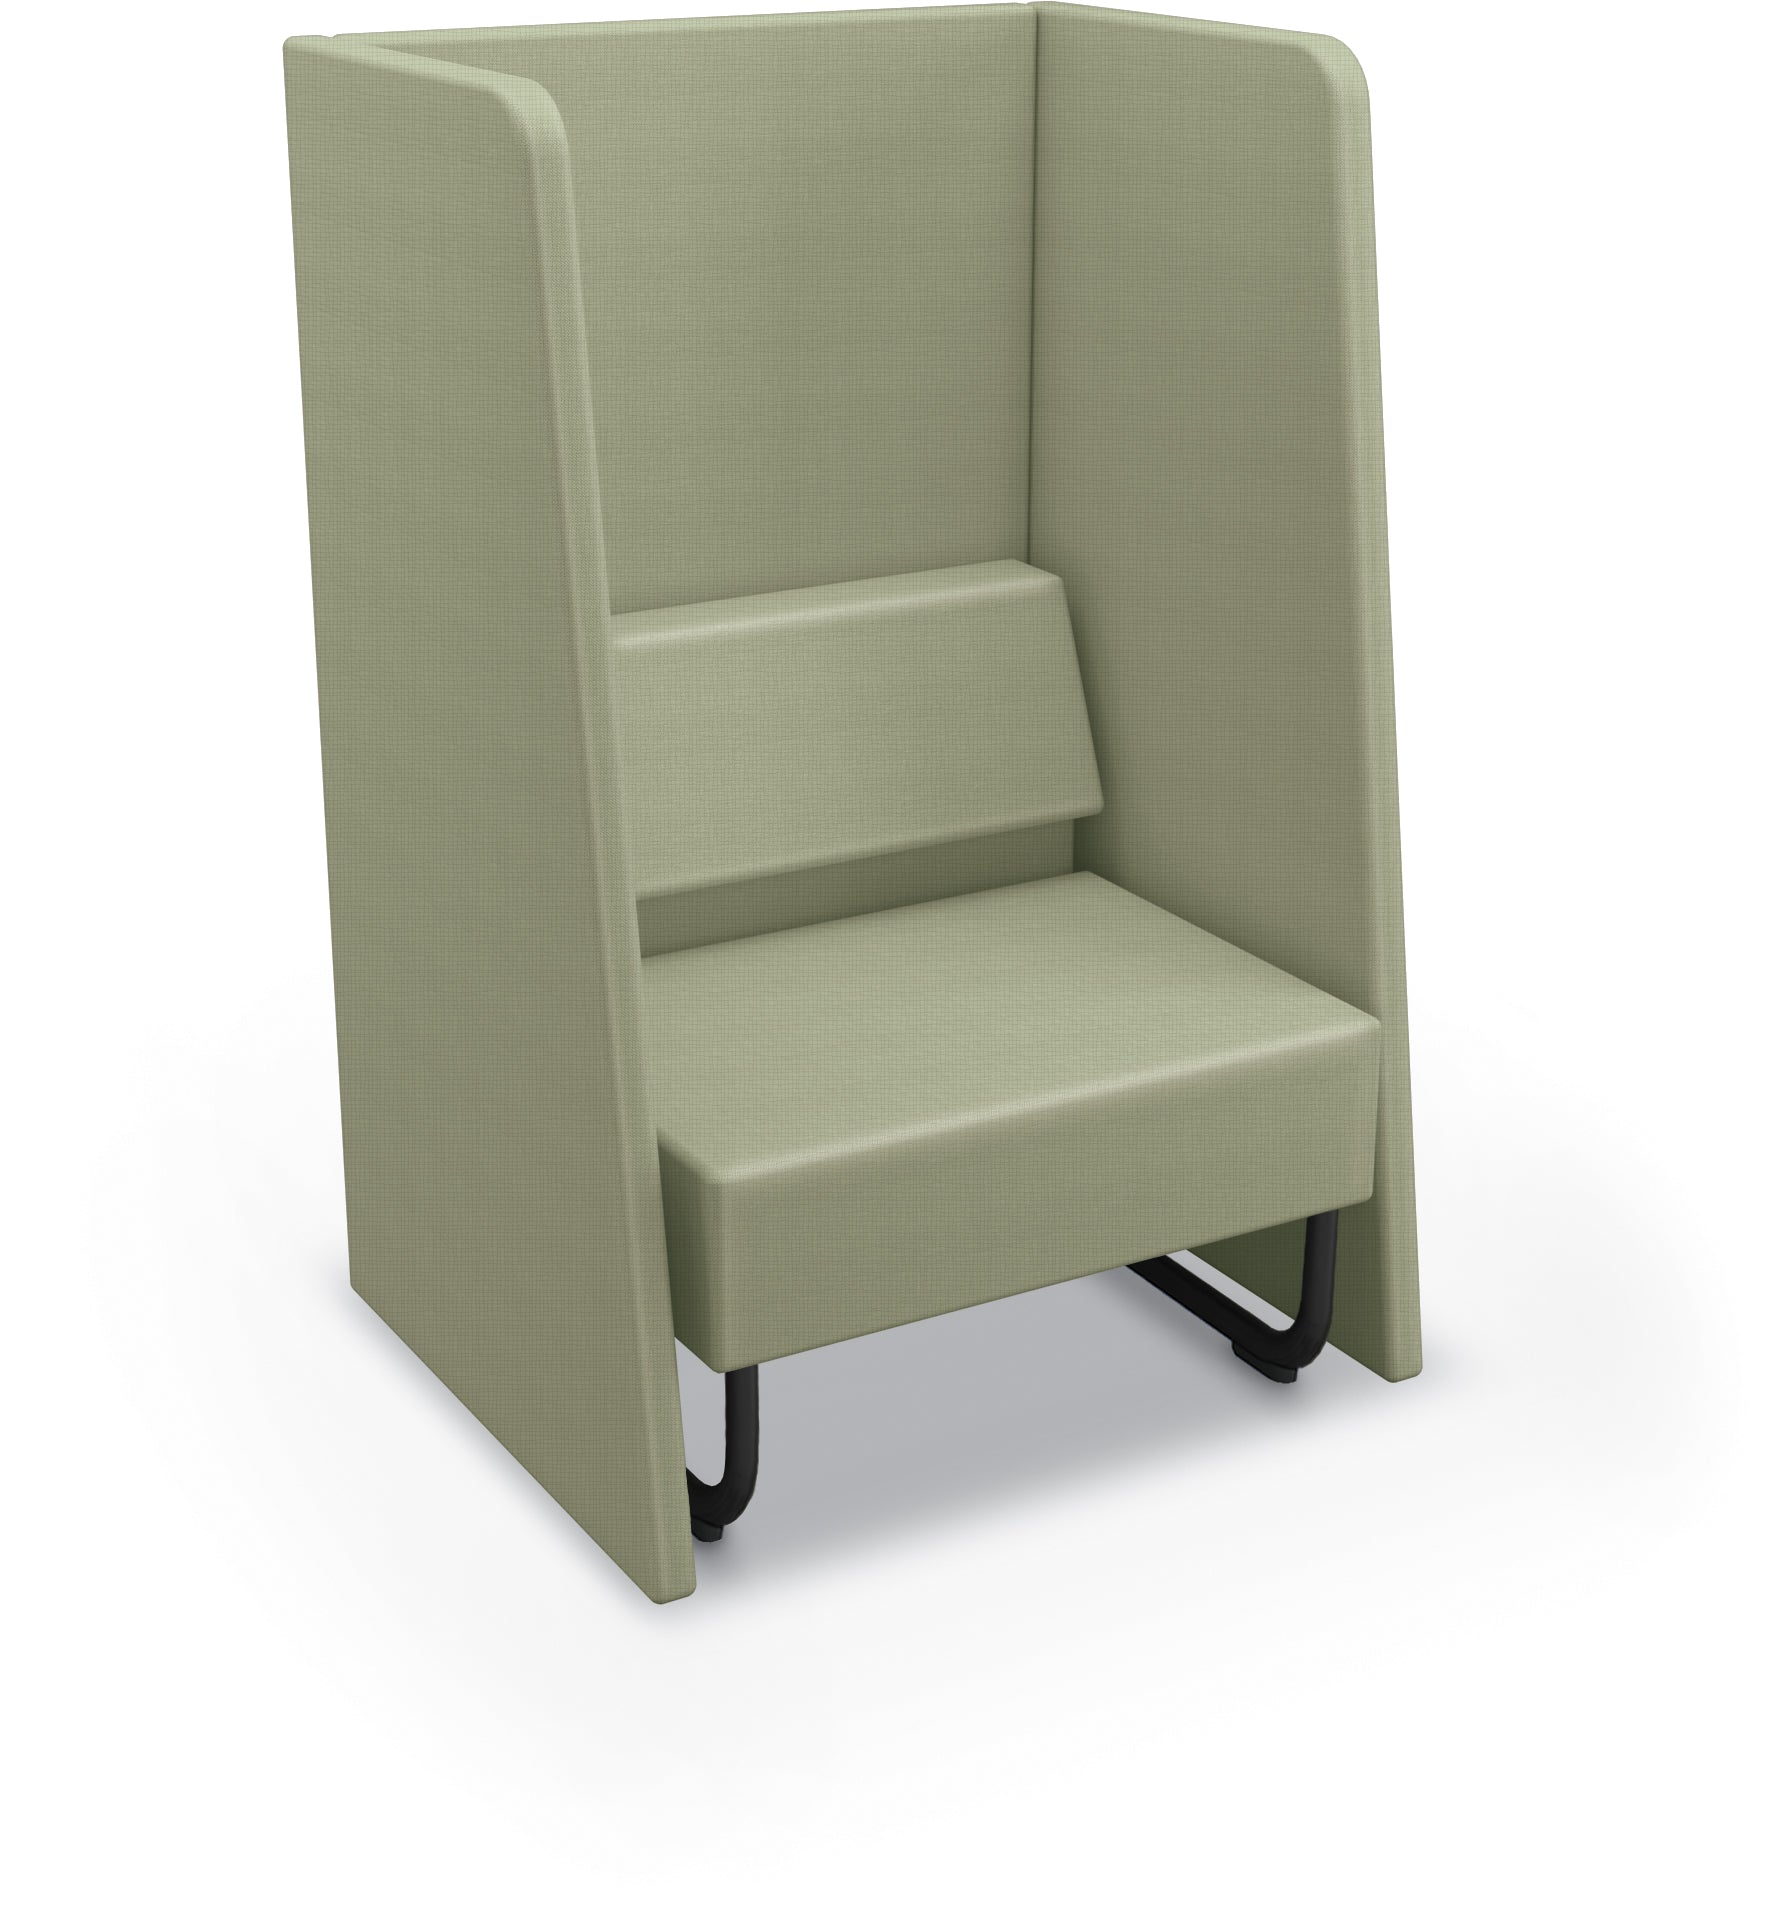 Mooreco Akt Soft Seating Lounge High Back Chair - Grade 02 Fabric and Powder Coated Sled Legs - SchoolOutlet